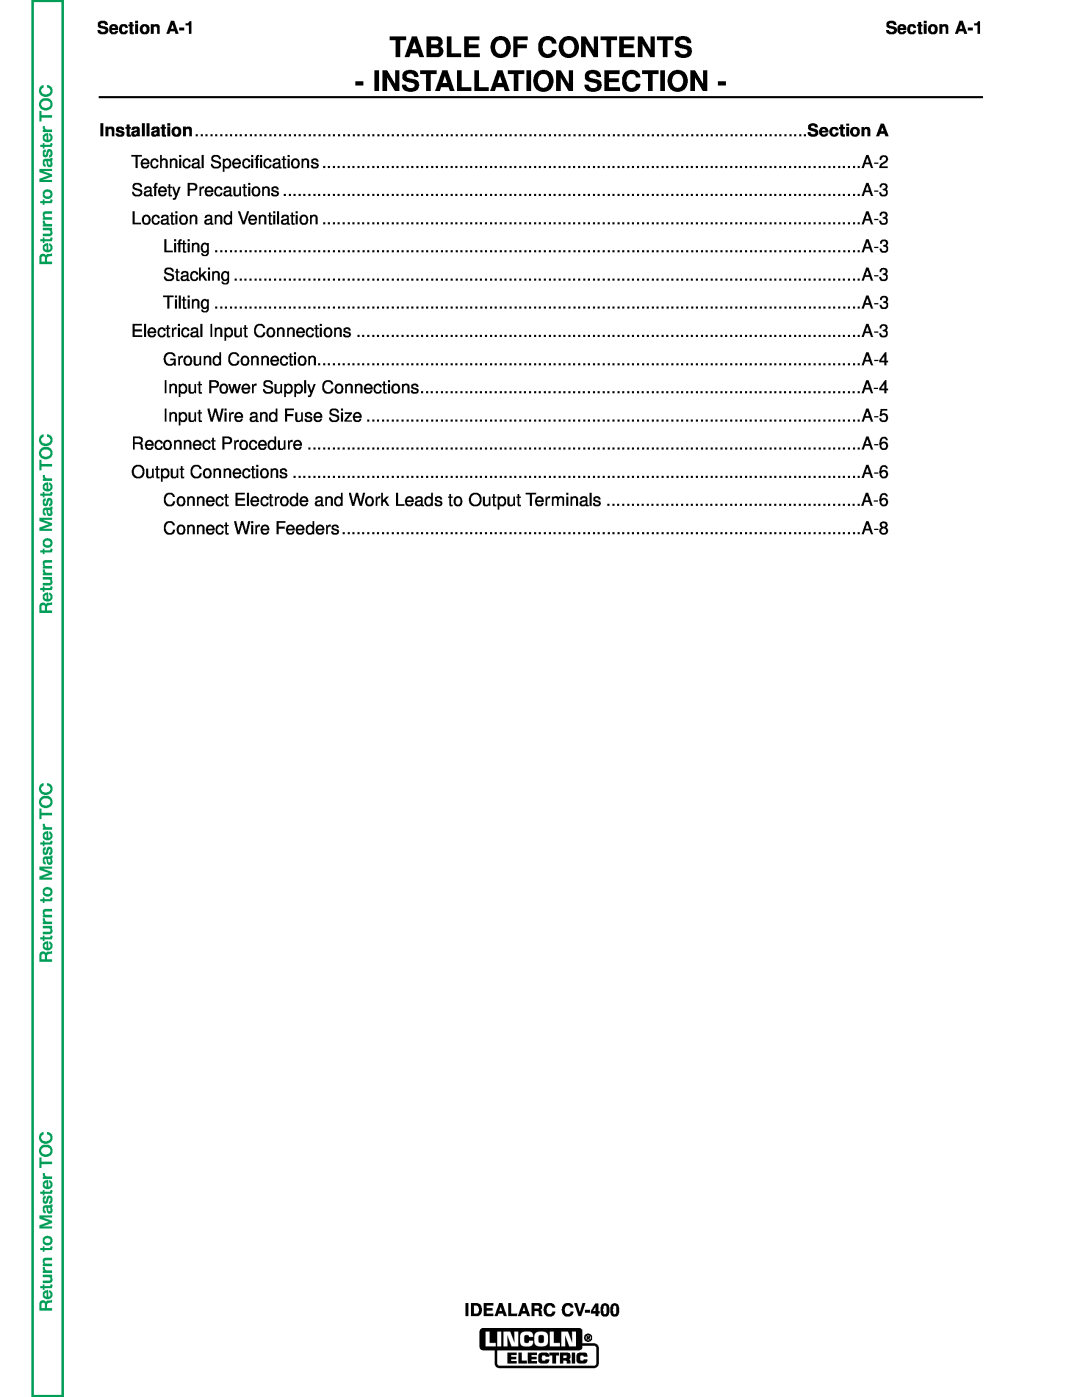 Lincoln Electric SVM136-A service manual Table Of Contents, Installation Section, Return to Master TOC, Section A 